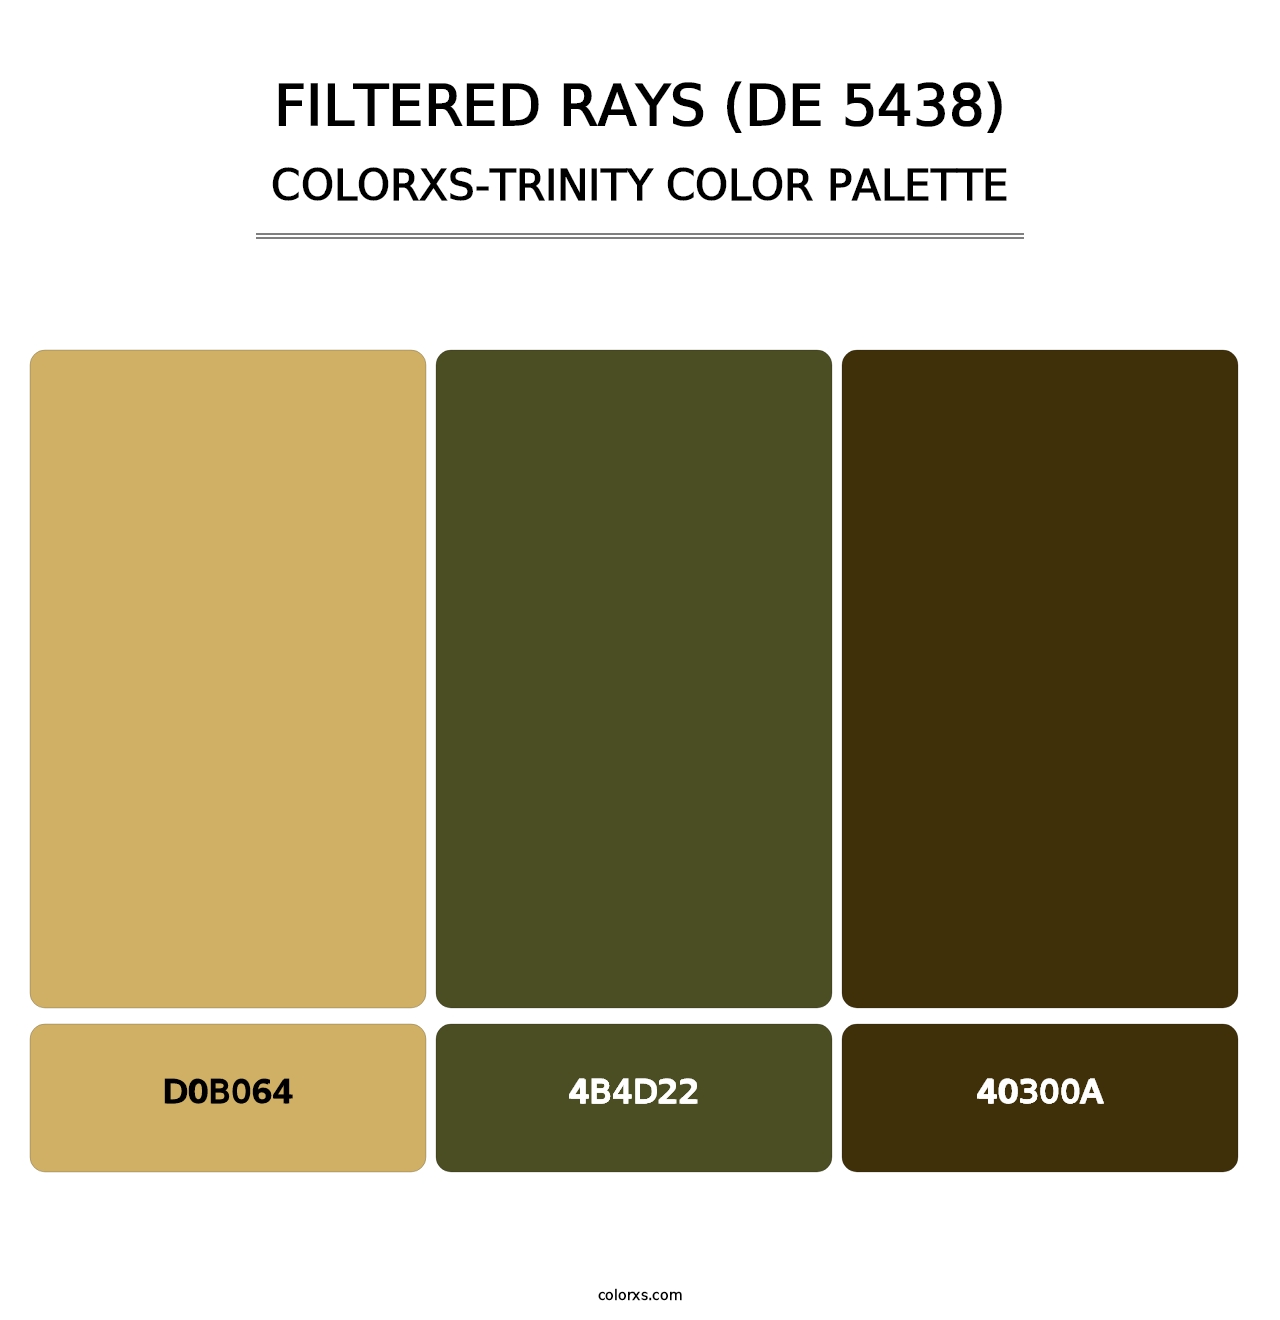 Filtered Rays (DE 5438) - Colorxs Trinity Palette